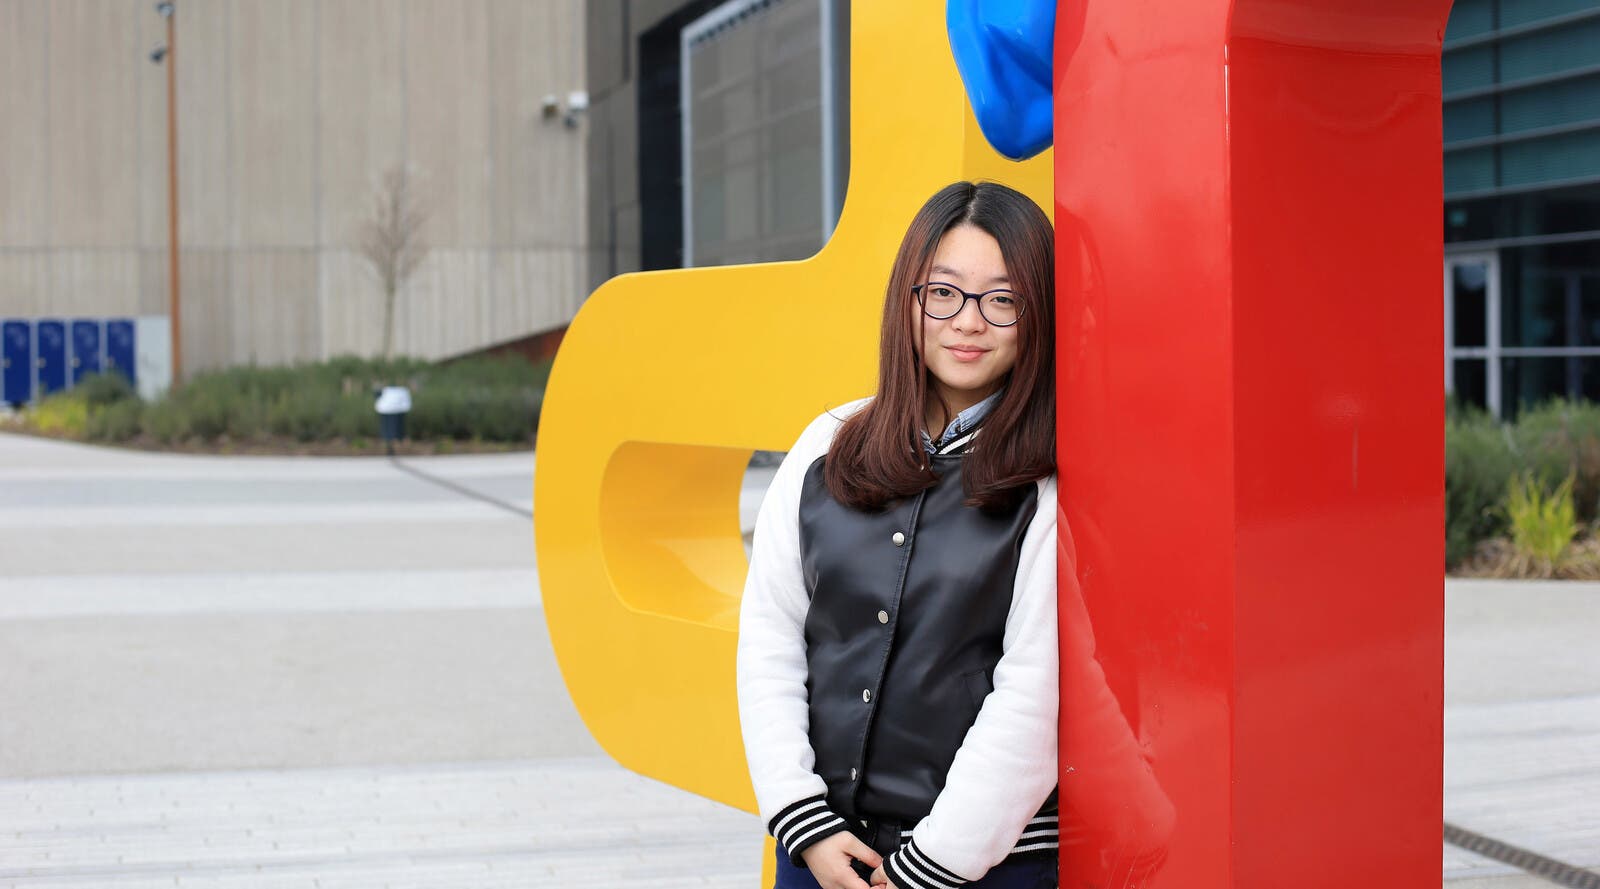 Student leaning on sculpture outside campus